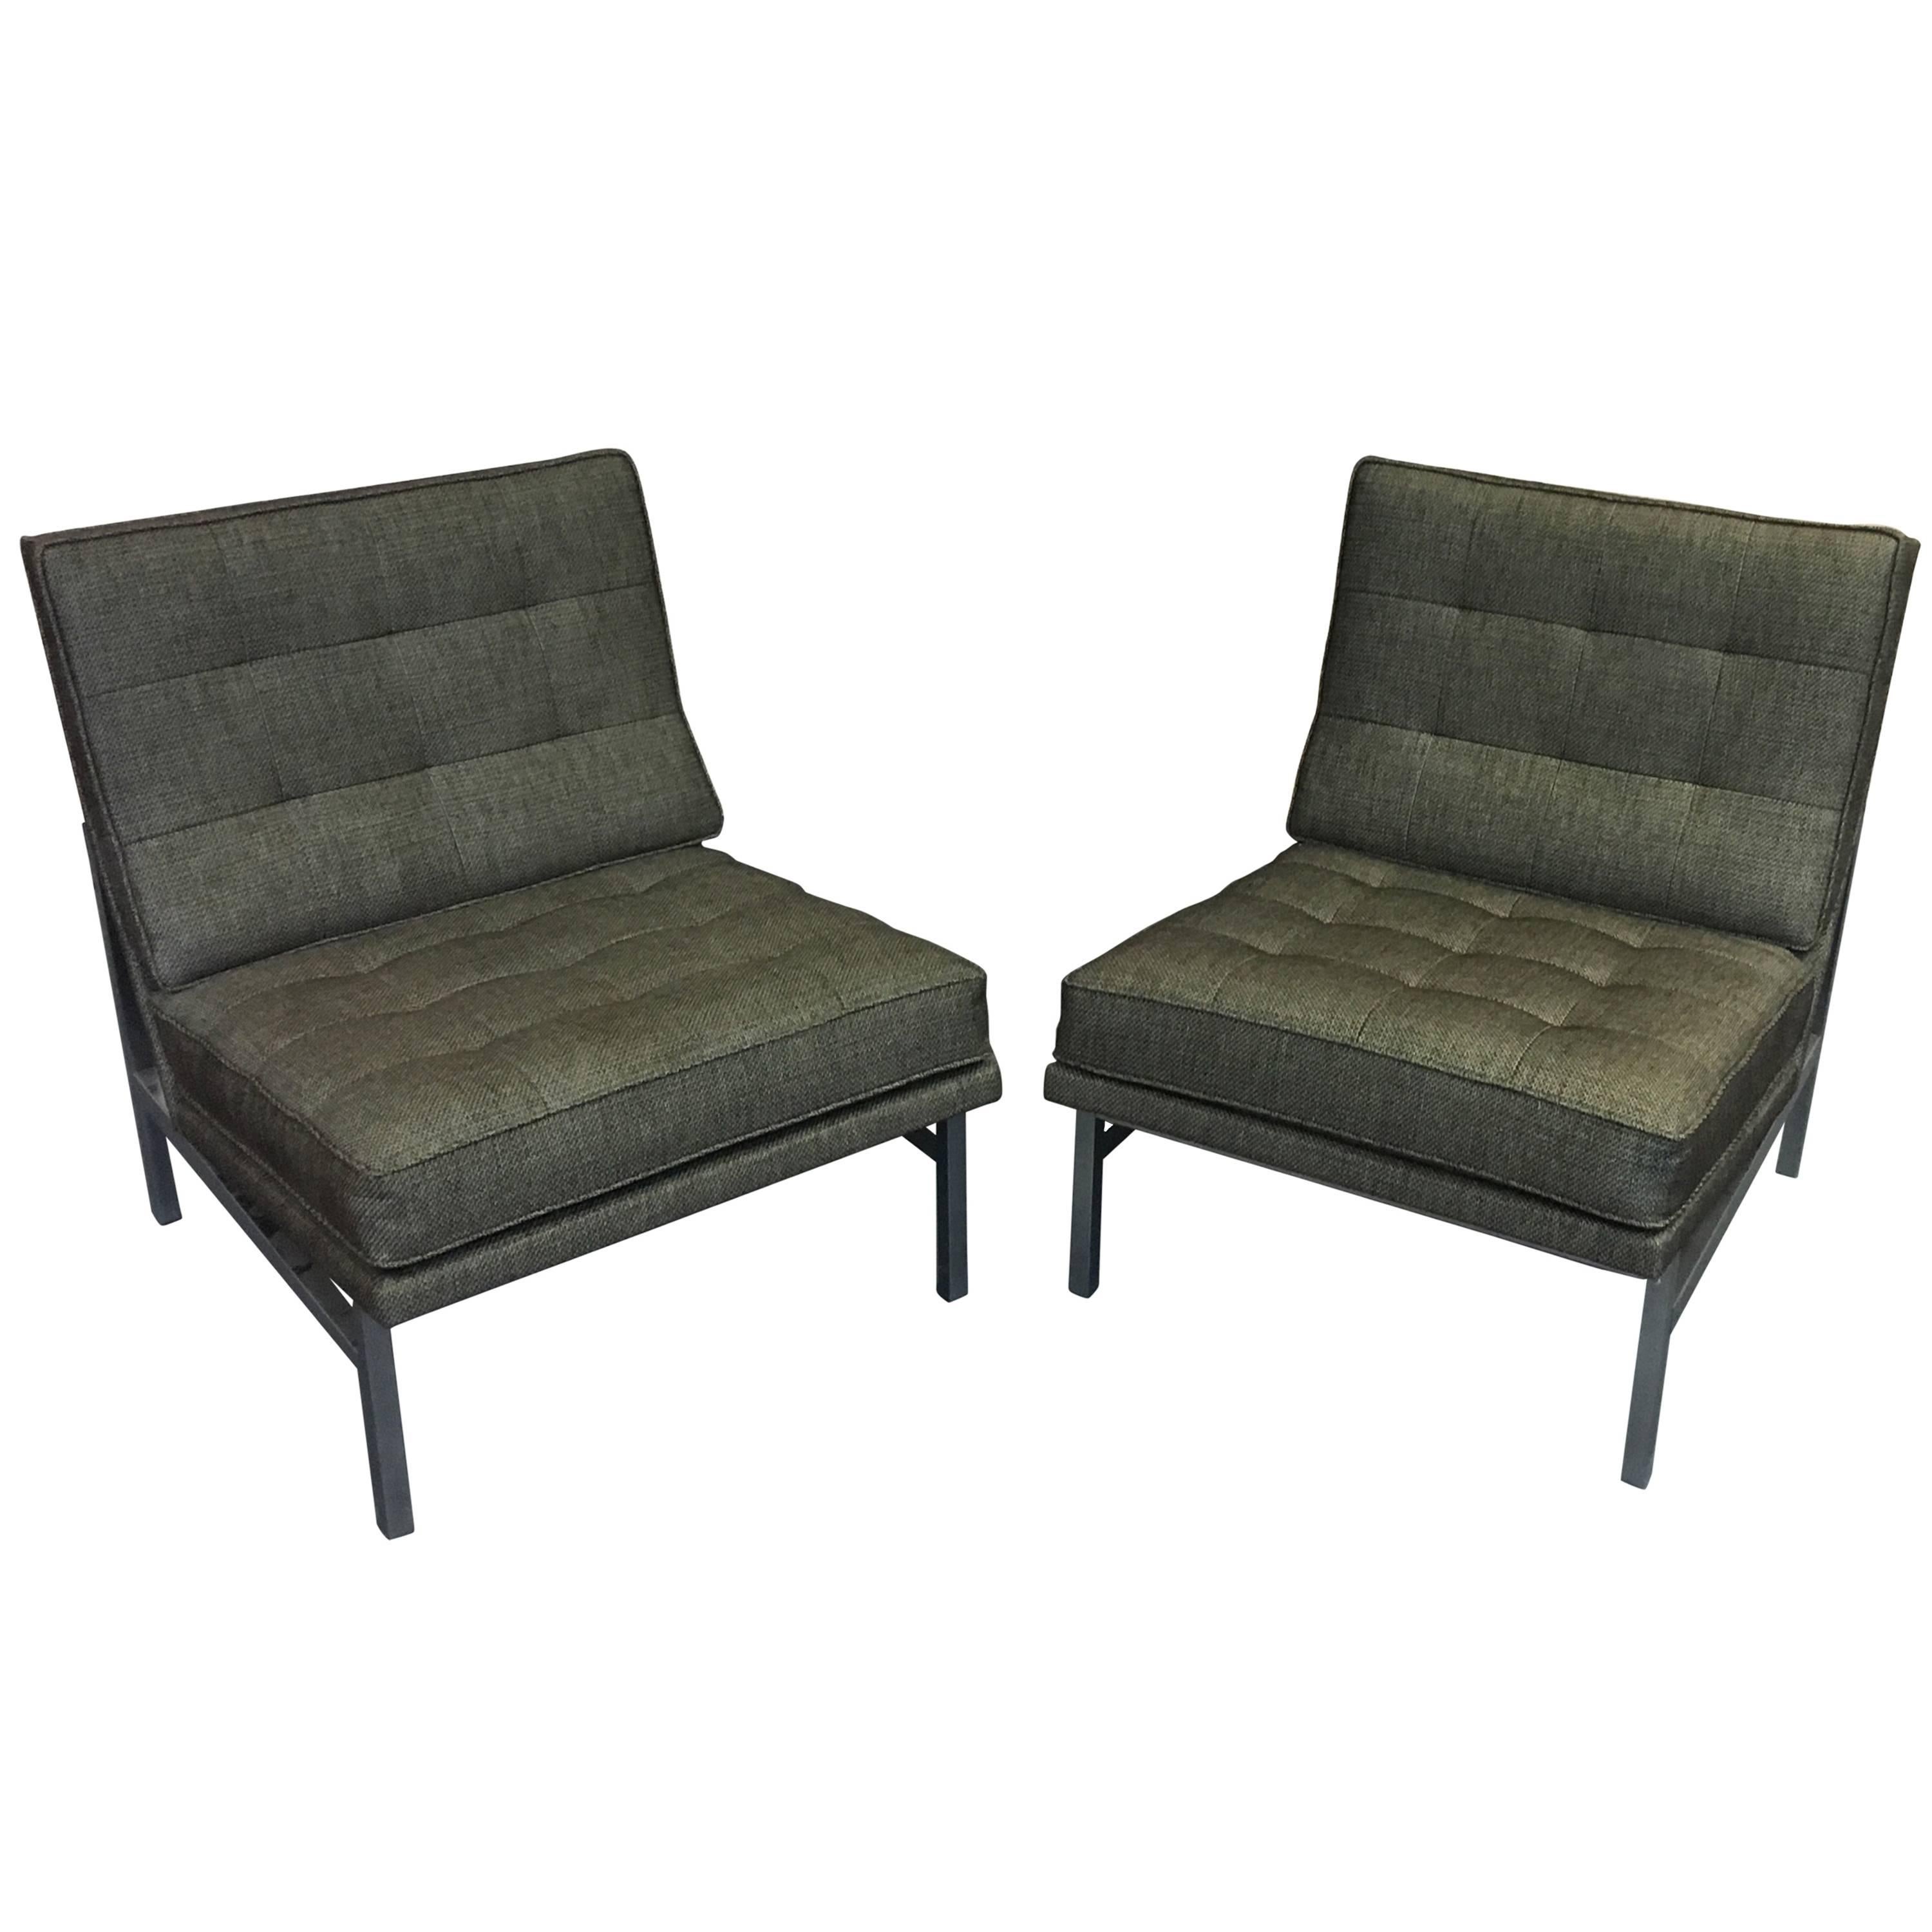 Pair of Florence Knoll Lounge Chairs for Knoll, circa 1960s For Sale